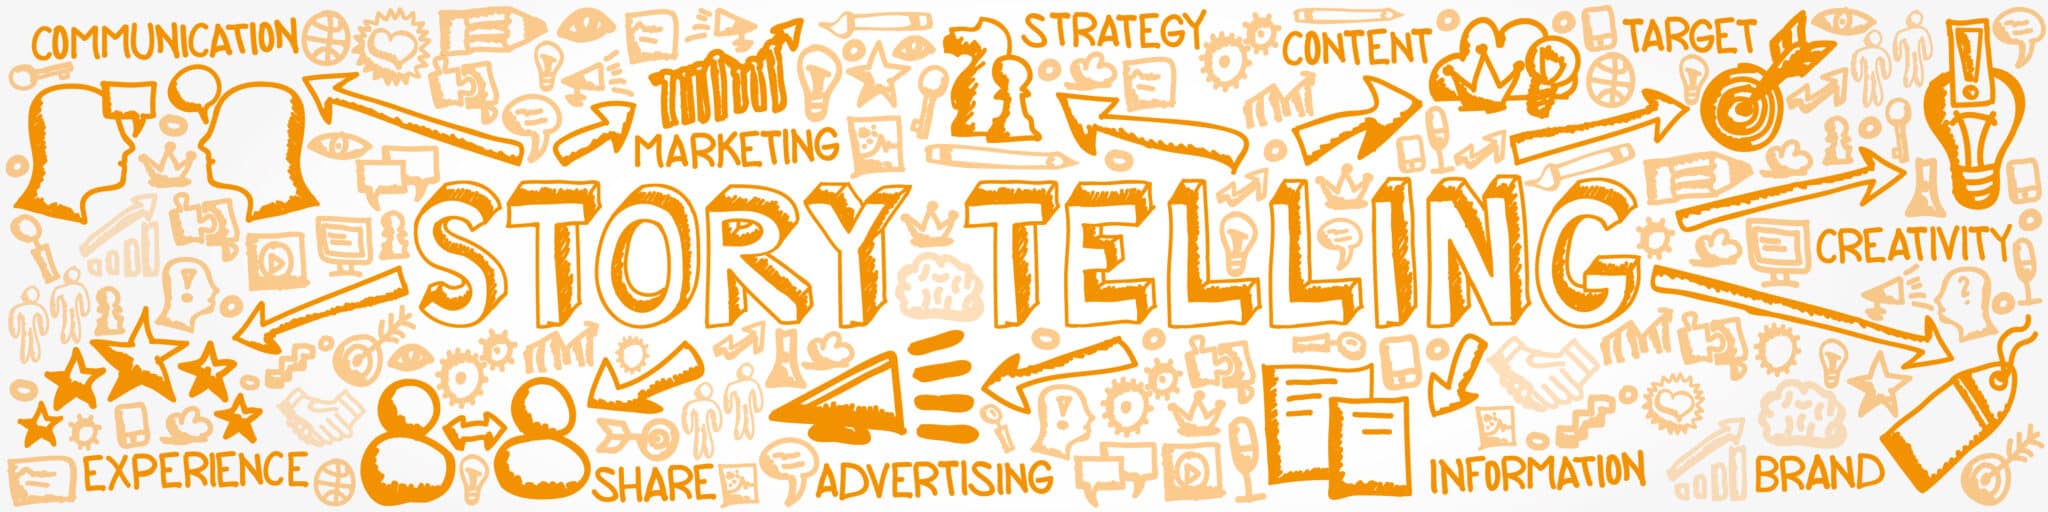 Storytelling Marketing with Video Concept